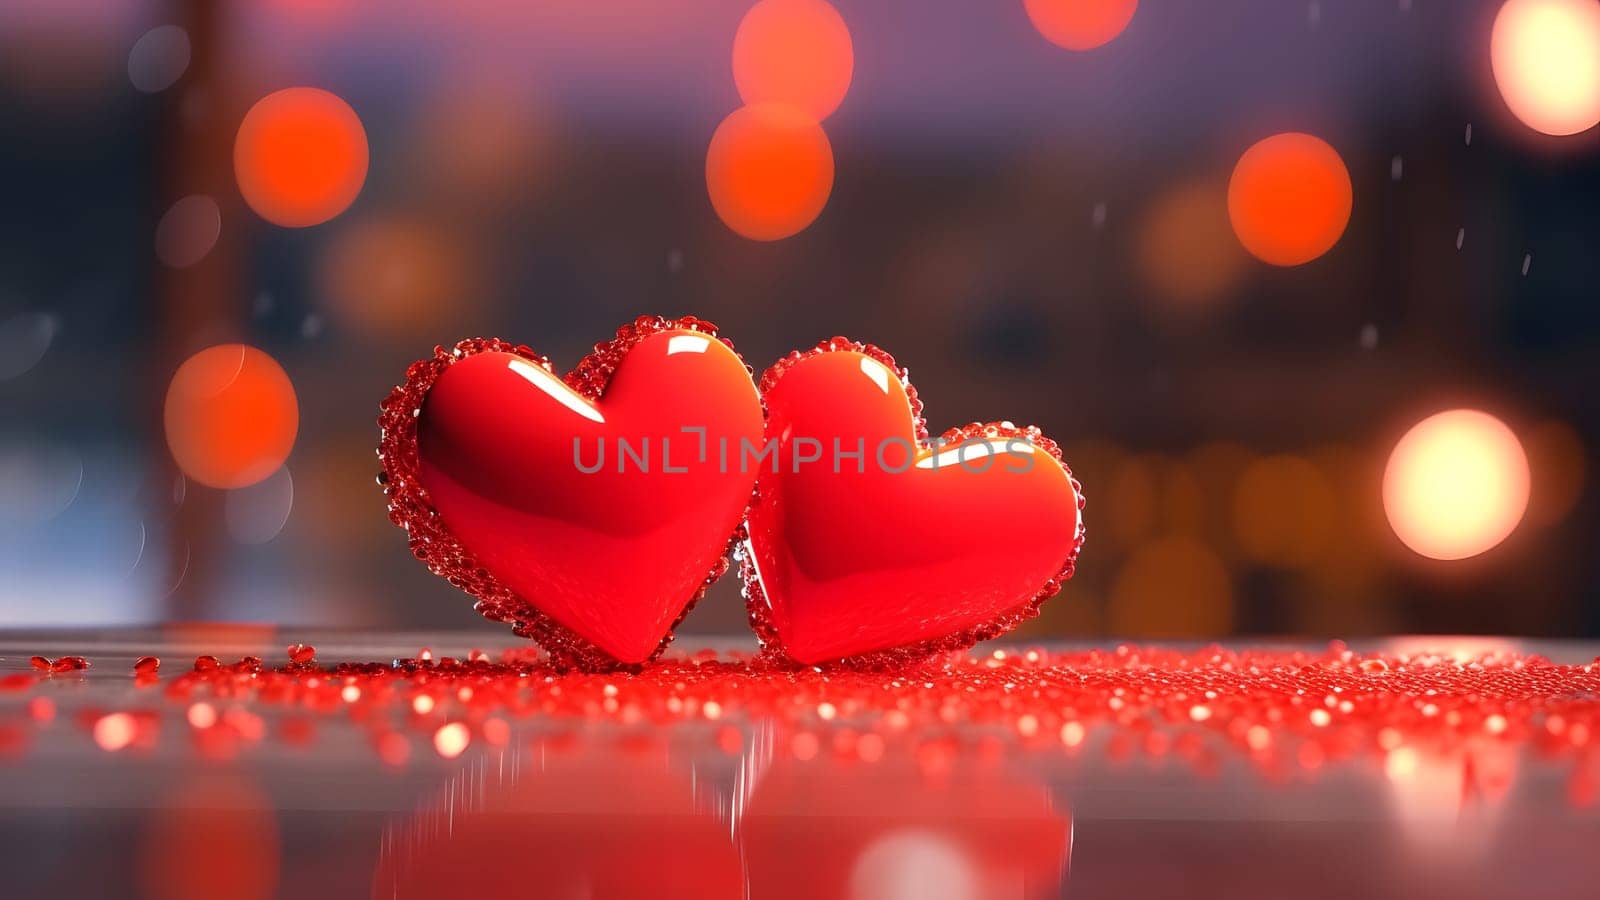 Saint Valentine day greeting card background with two red hearts against festive bokeh, neural network generated photorealistic image by z1b